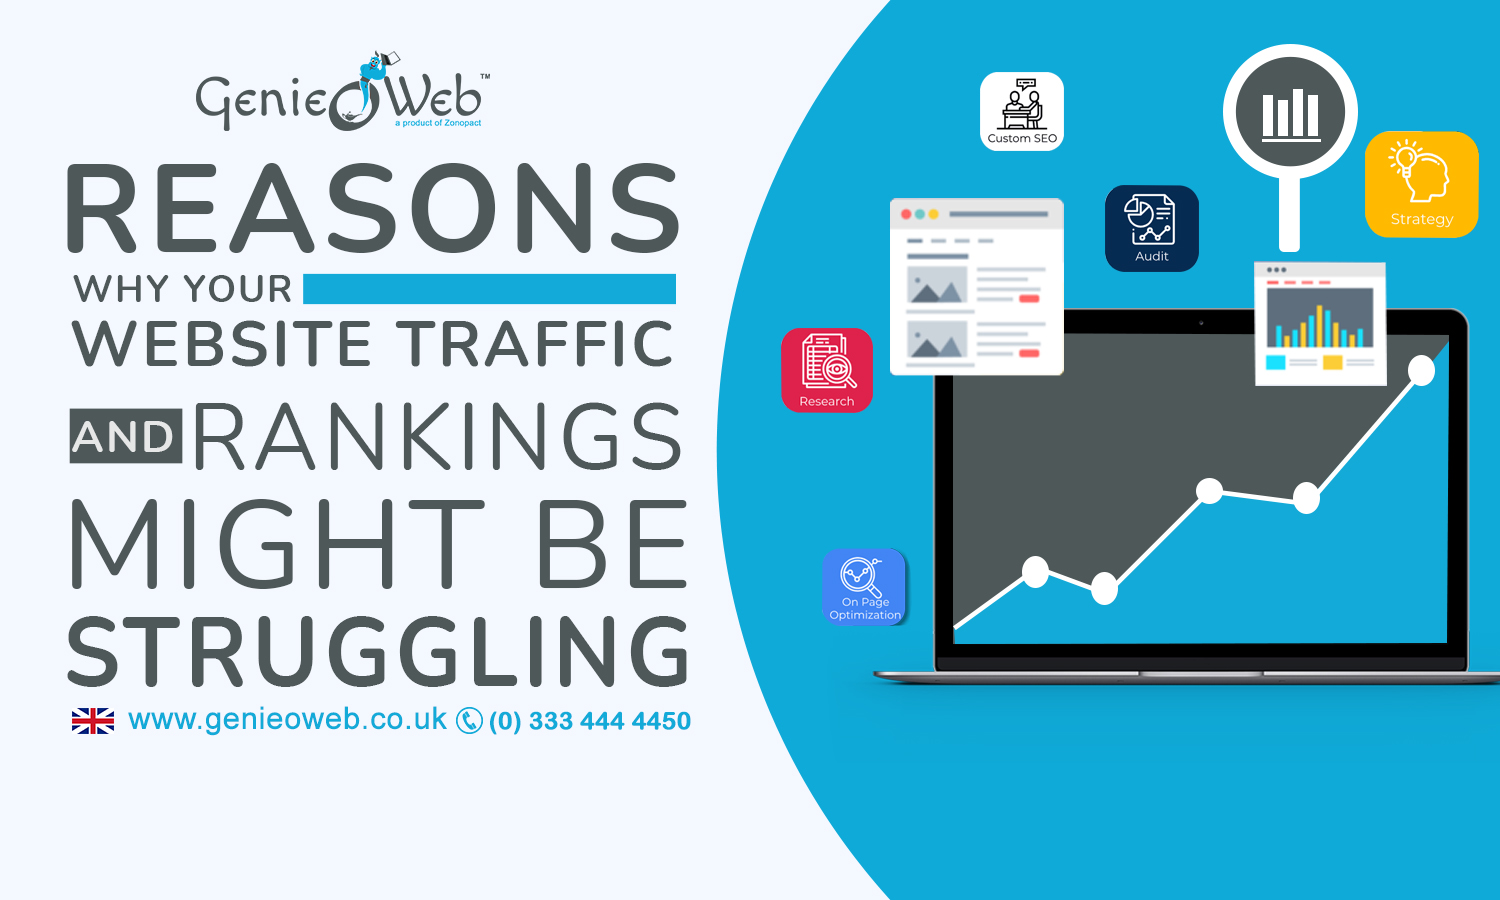 Reasons Why Your Website Traffic and Rankings Might Be Struggling